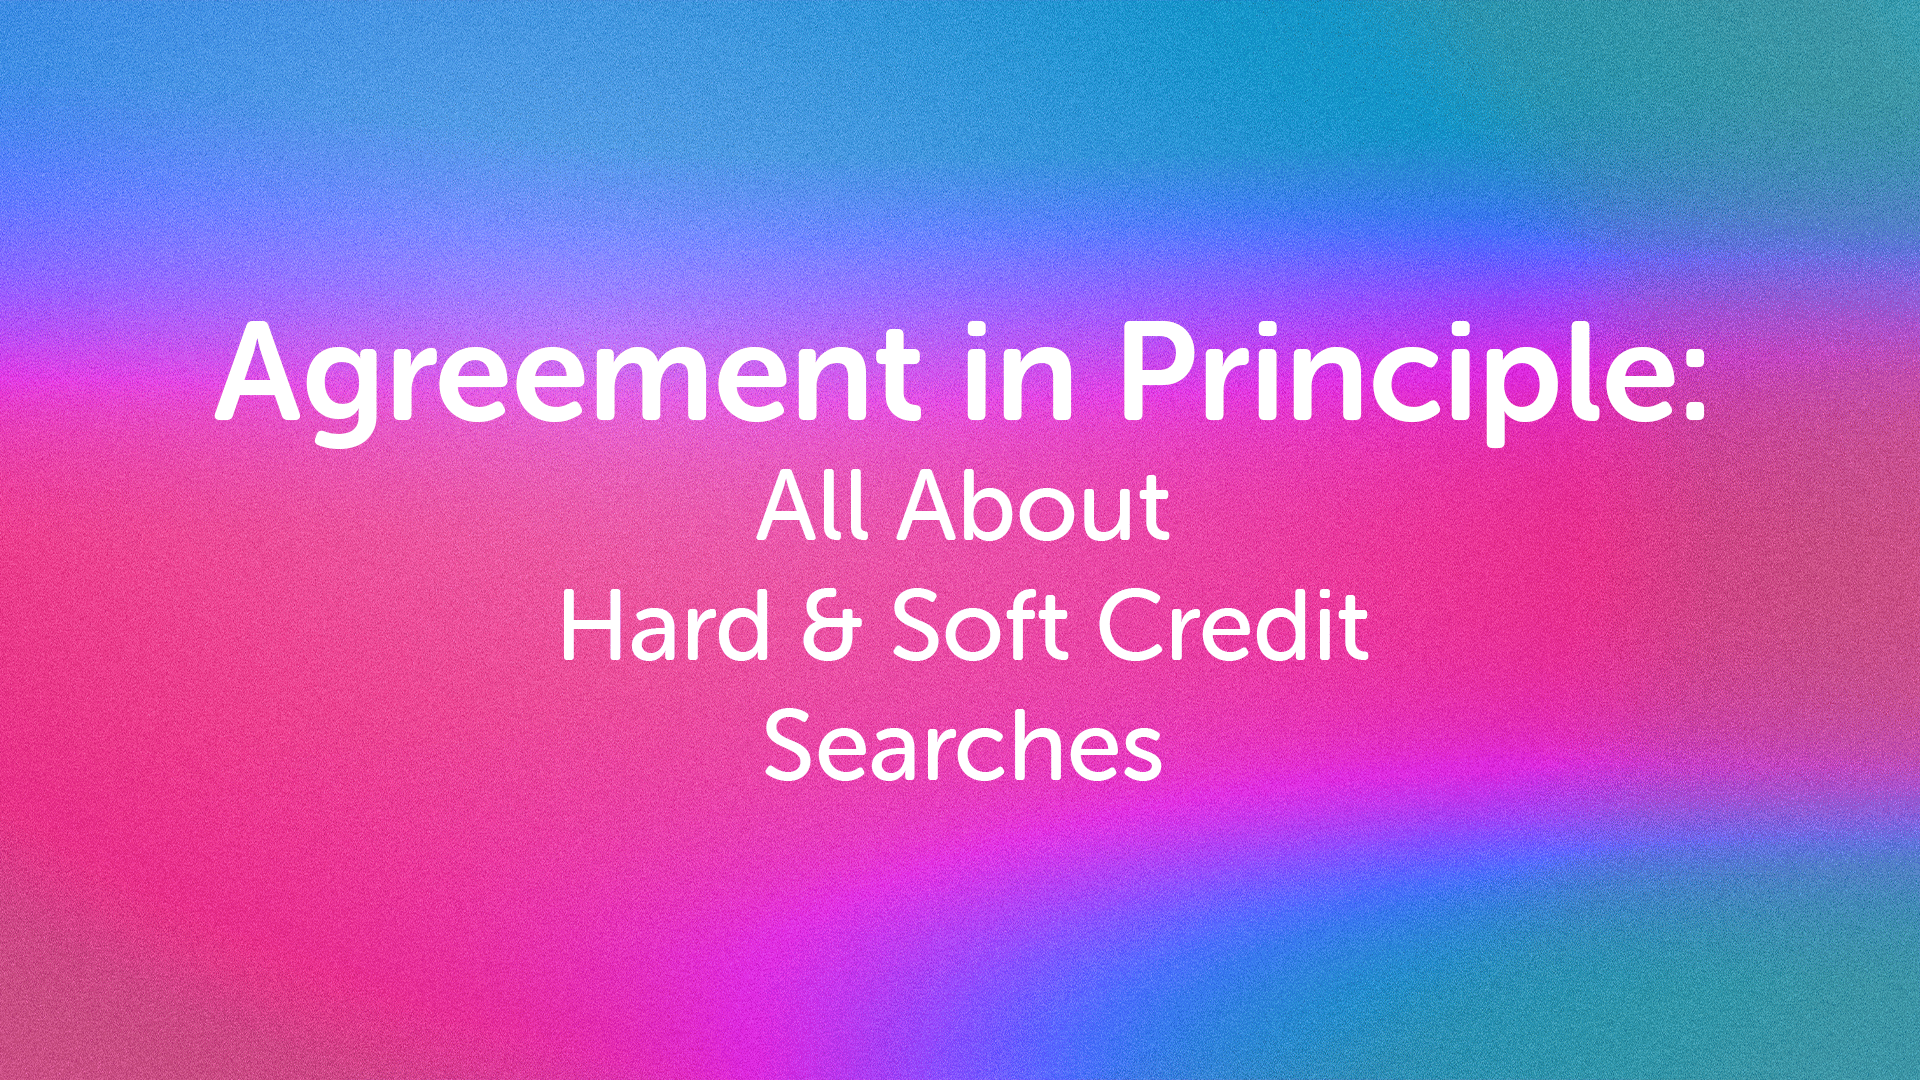 Agreement in Principle and Soft Credit Searches